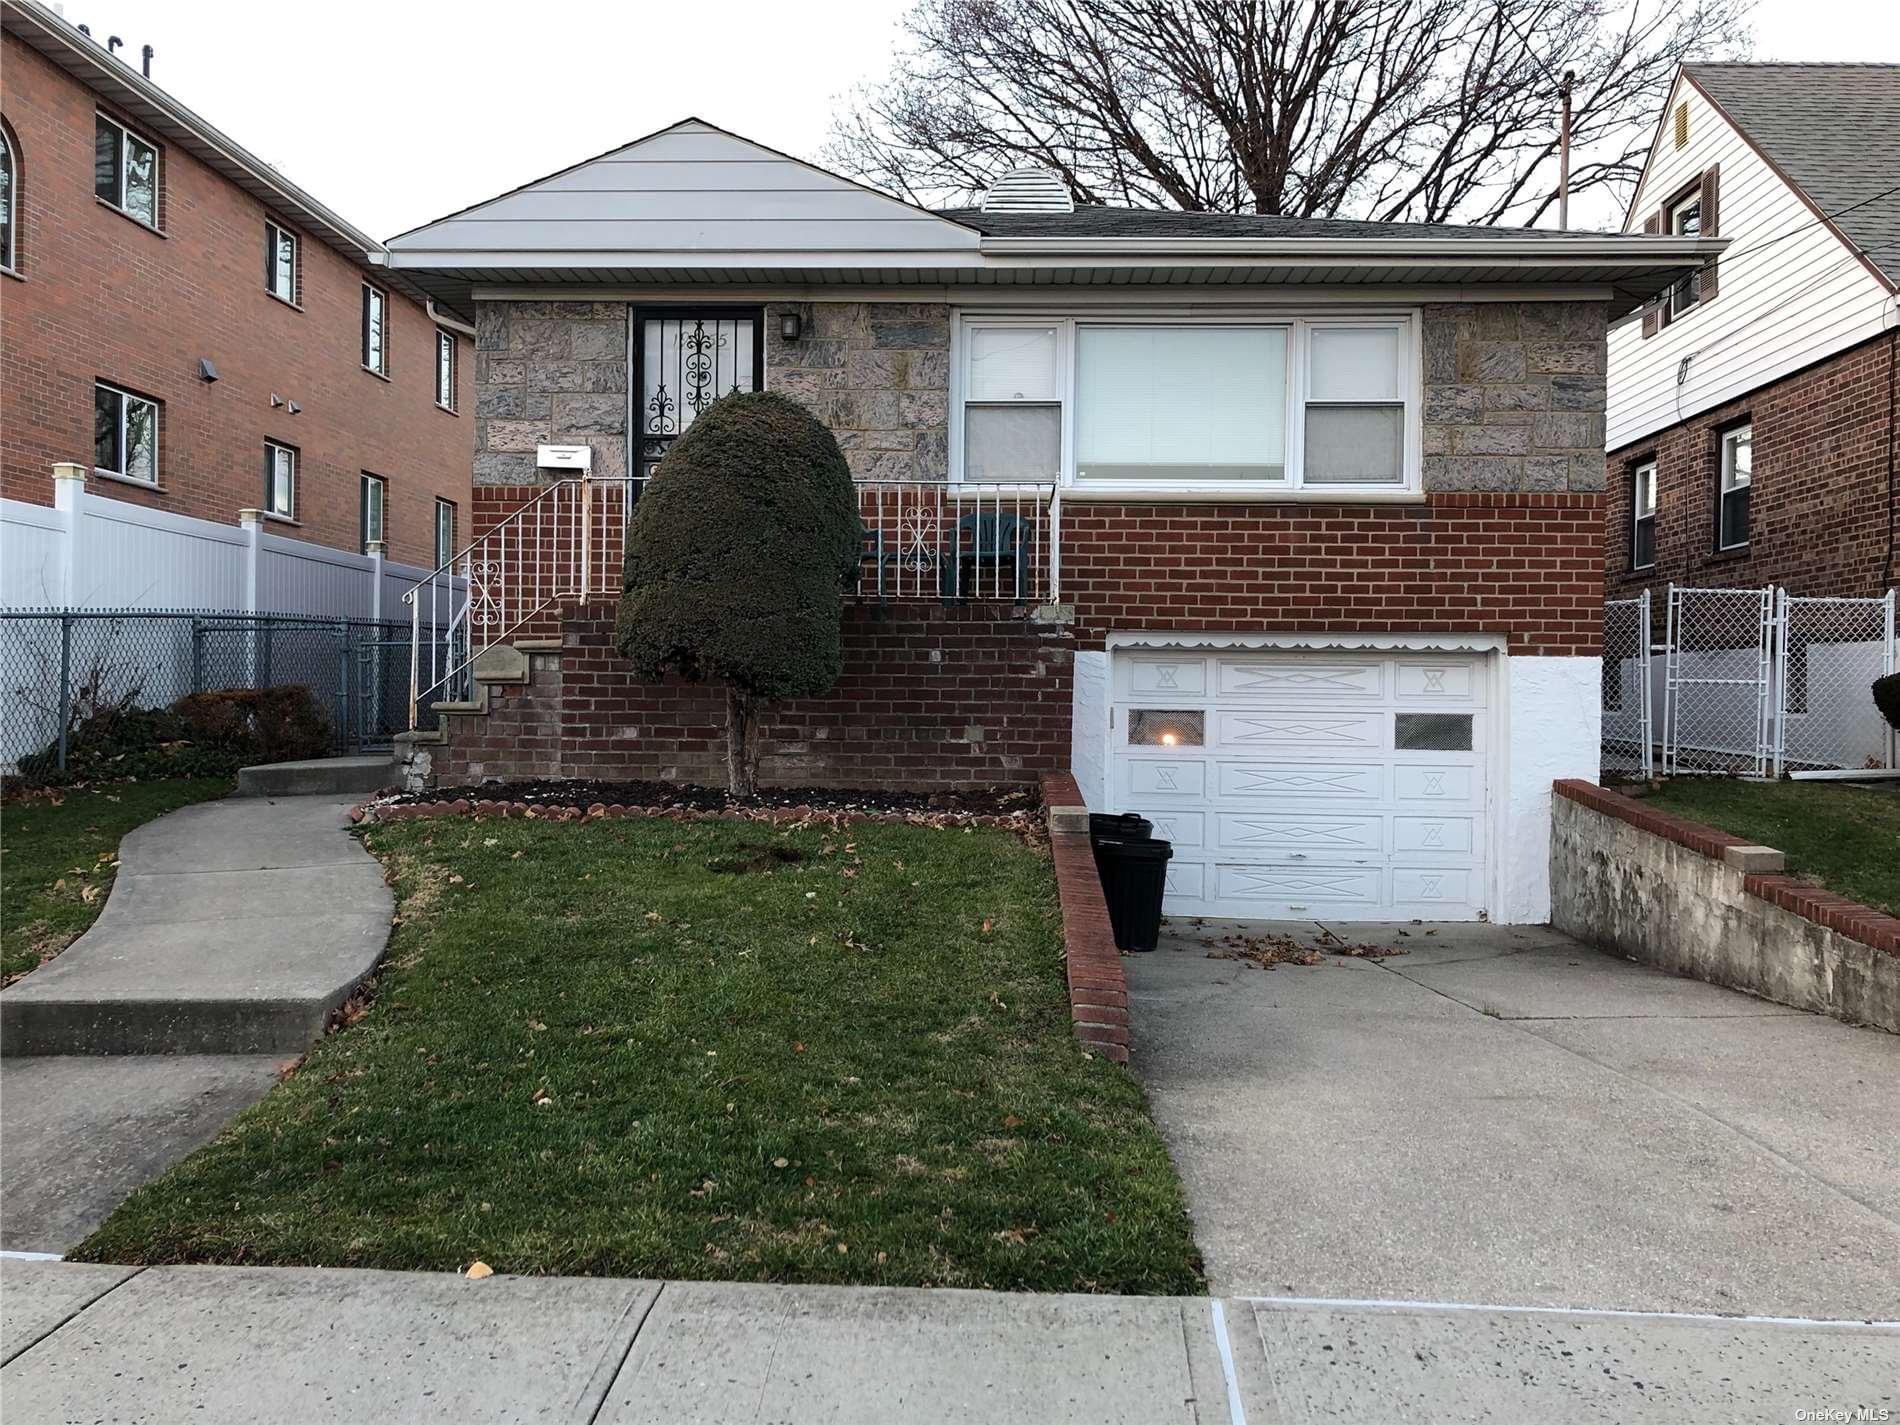 196-55 45th Road in Queens, Flushing, NY 11358